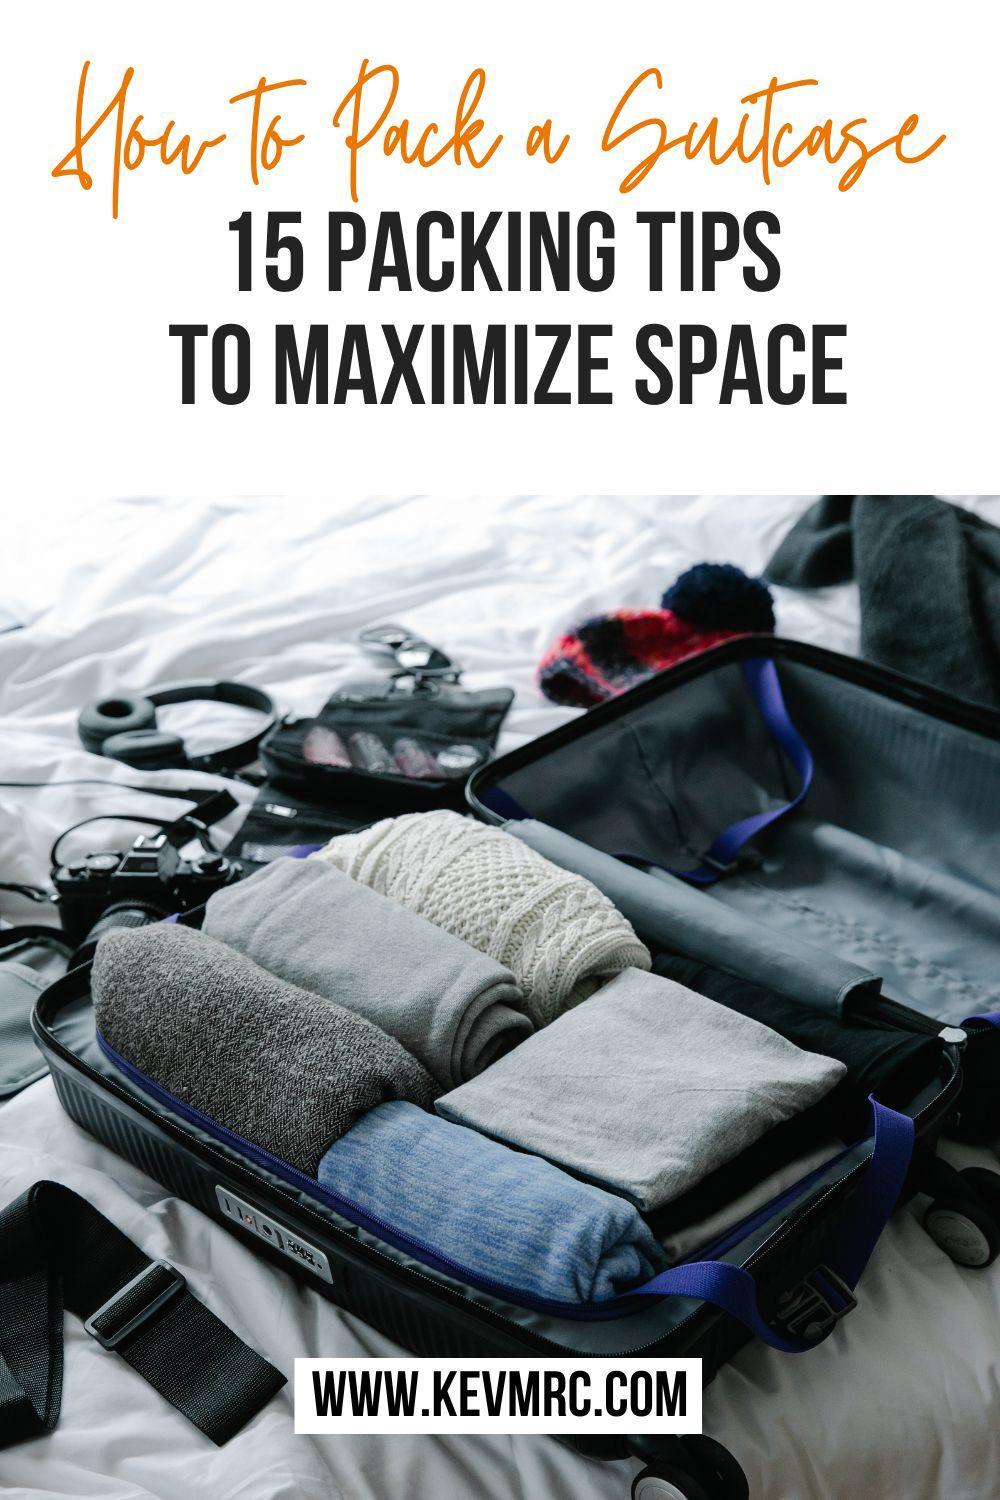 Discover the 15 best tips on how to pack a suitcase efficiently to maximize space and save time. packing tips for travel | suitcase packing tips | space saving travel hacks |  how to pack a suitcase to save room | packing tips for vacation #packingtips